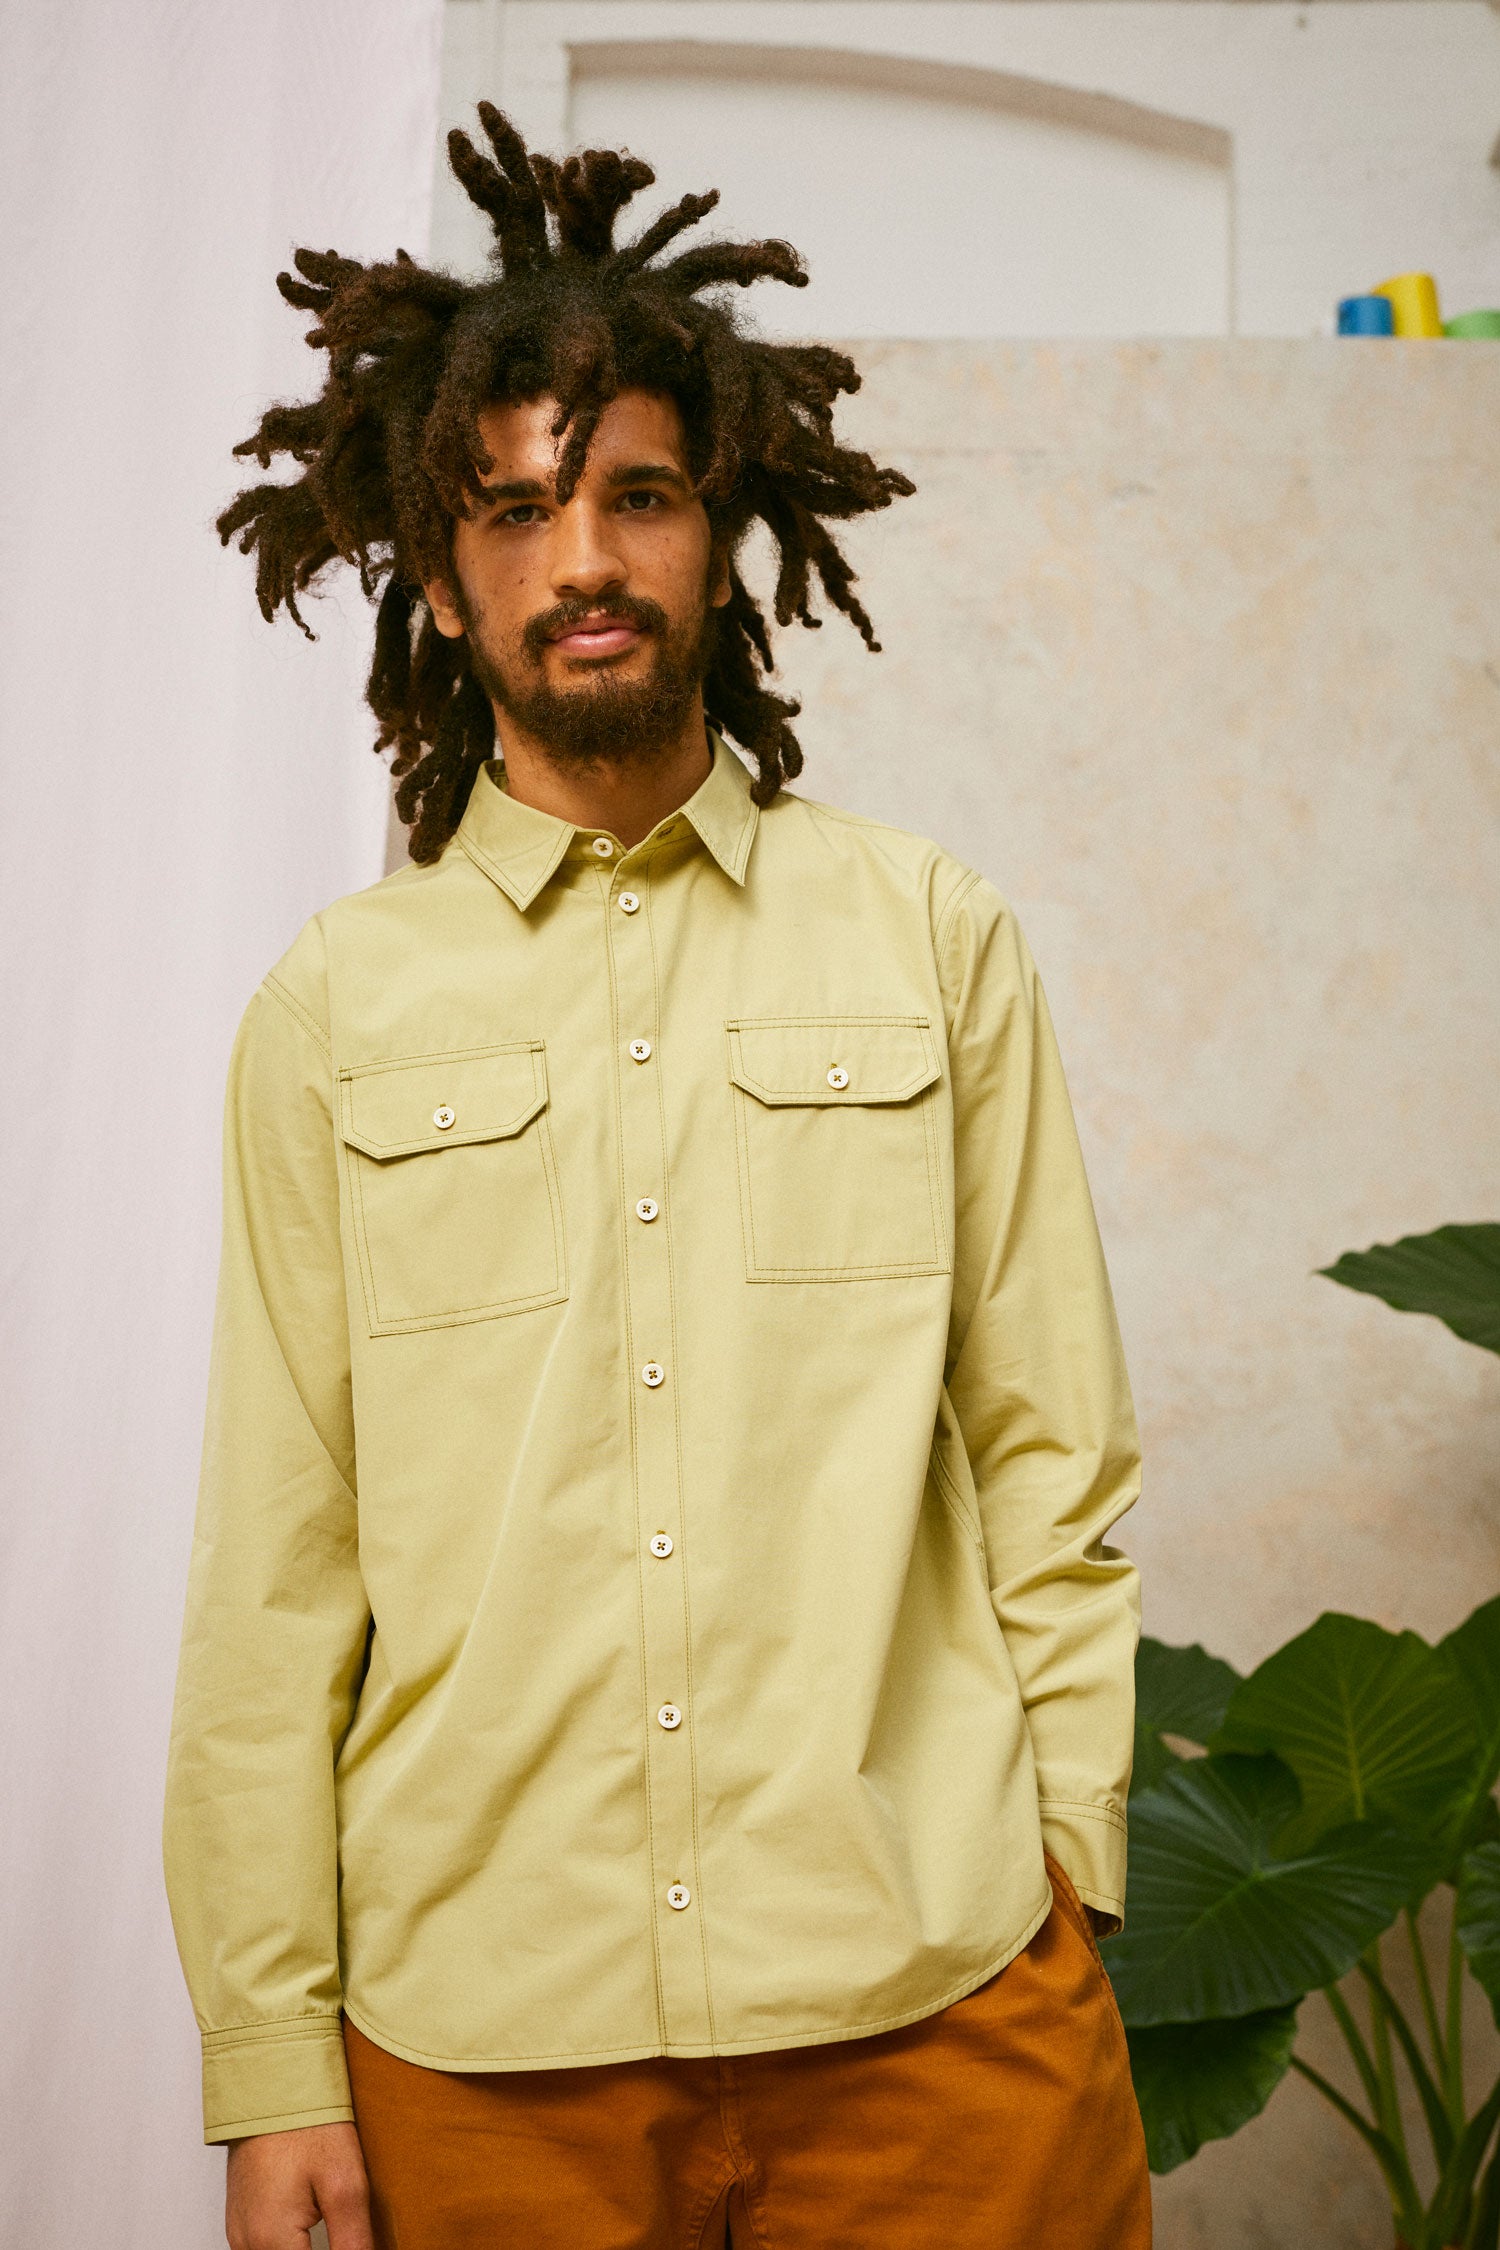 Close up of model wearing Saywood's Eddy Mens Khaki Shirt with utility pockets. Worn with tabacco trousers just visible. Model has one hand in his trouser pocket and a plant and drop of pink fabric can be seen in the background.